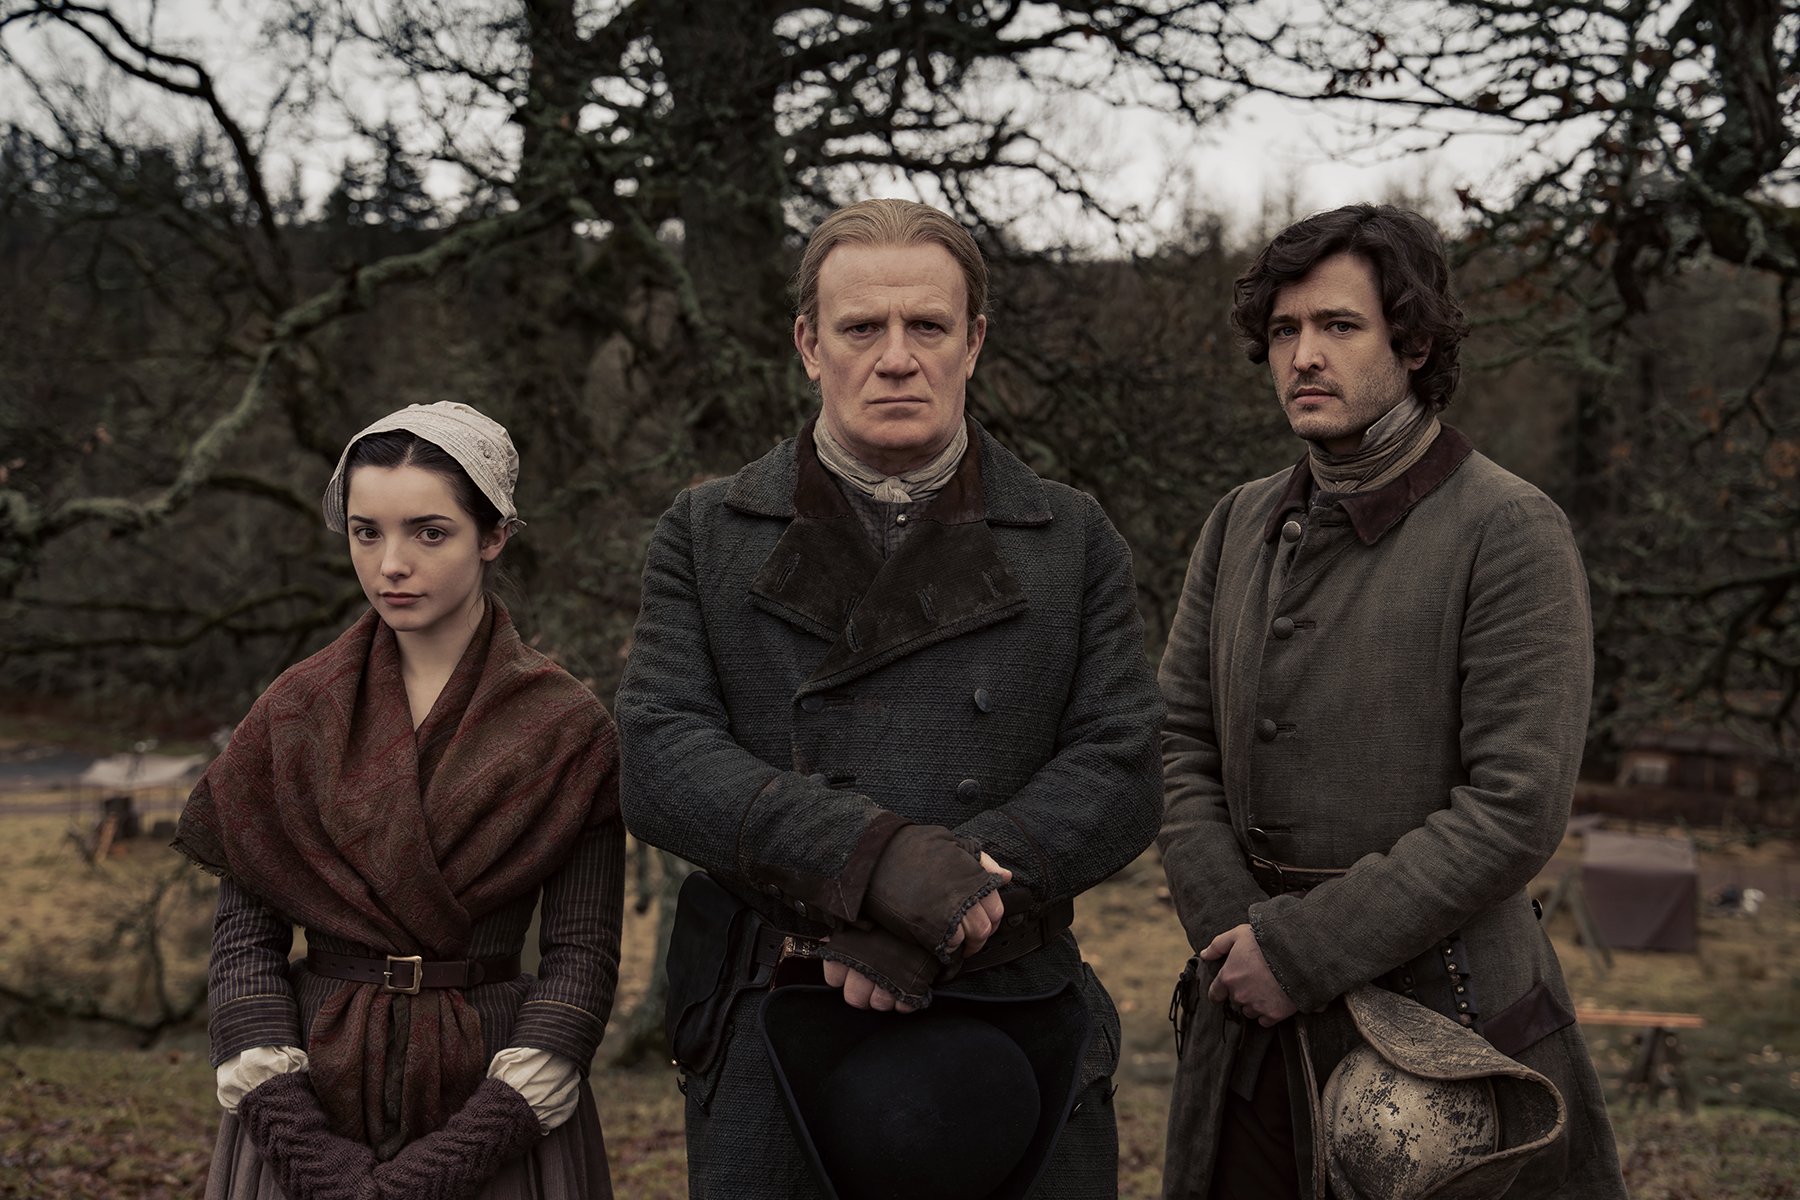 Malva Christie, Tom Christie, and Allan Christie in standing in a row with their arms folded in 'Outlander' Season 6